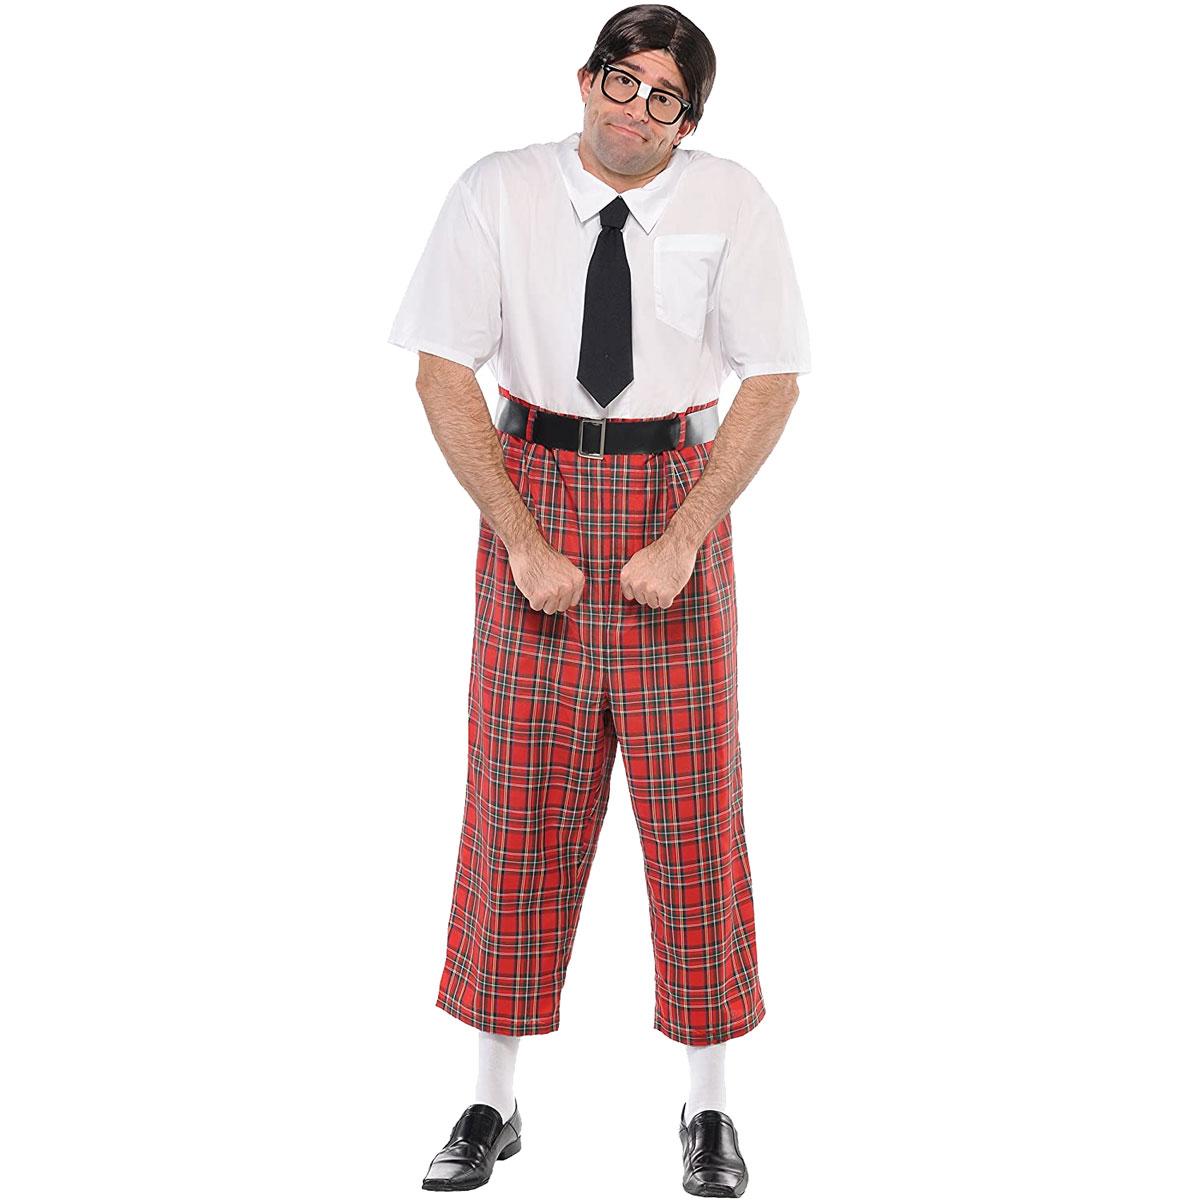 High School Nerd Fancy Dress Costume from a collection of School Uniforms for adults. By Amscan 841176 its available here at Karnival Costumes online party shop